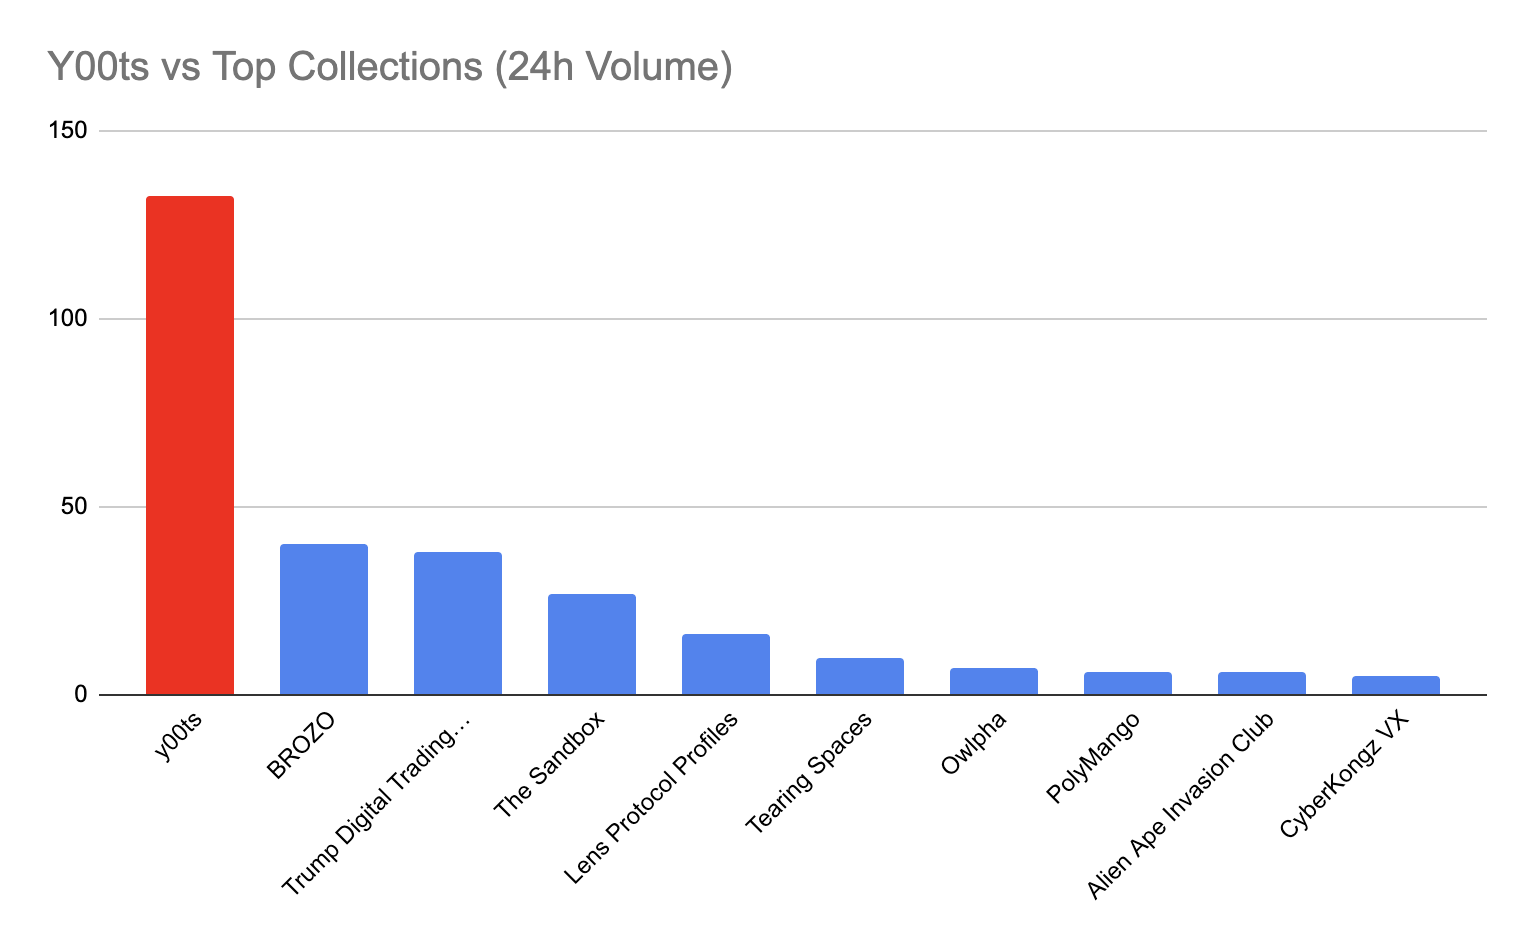 Y00ts vs Top Collections on Polygon (24h Volume)